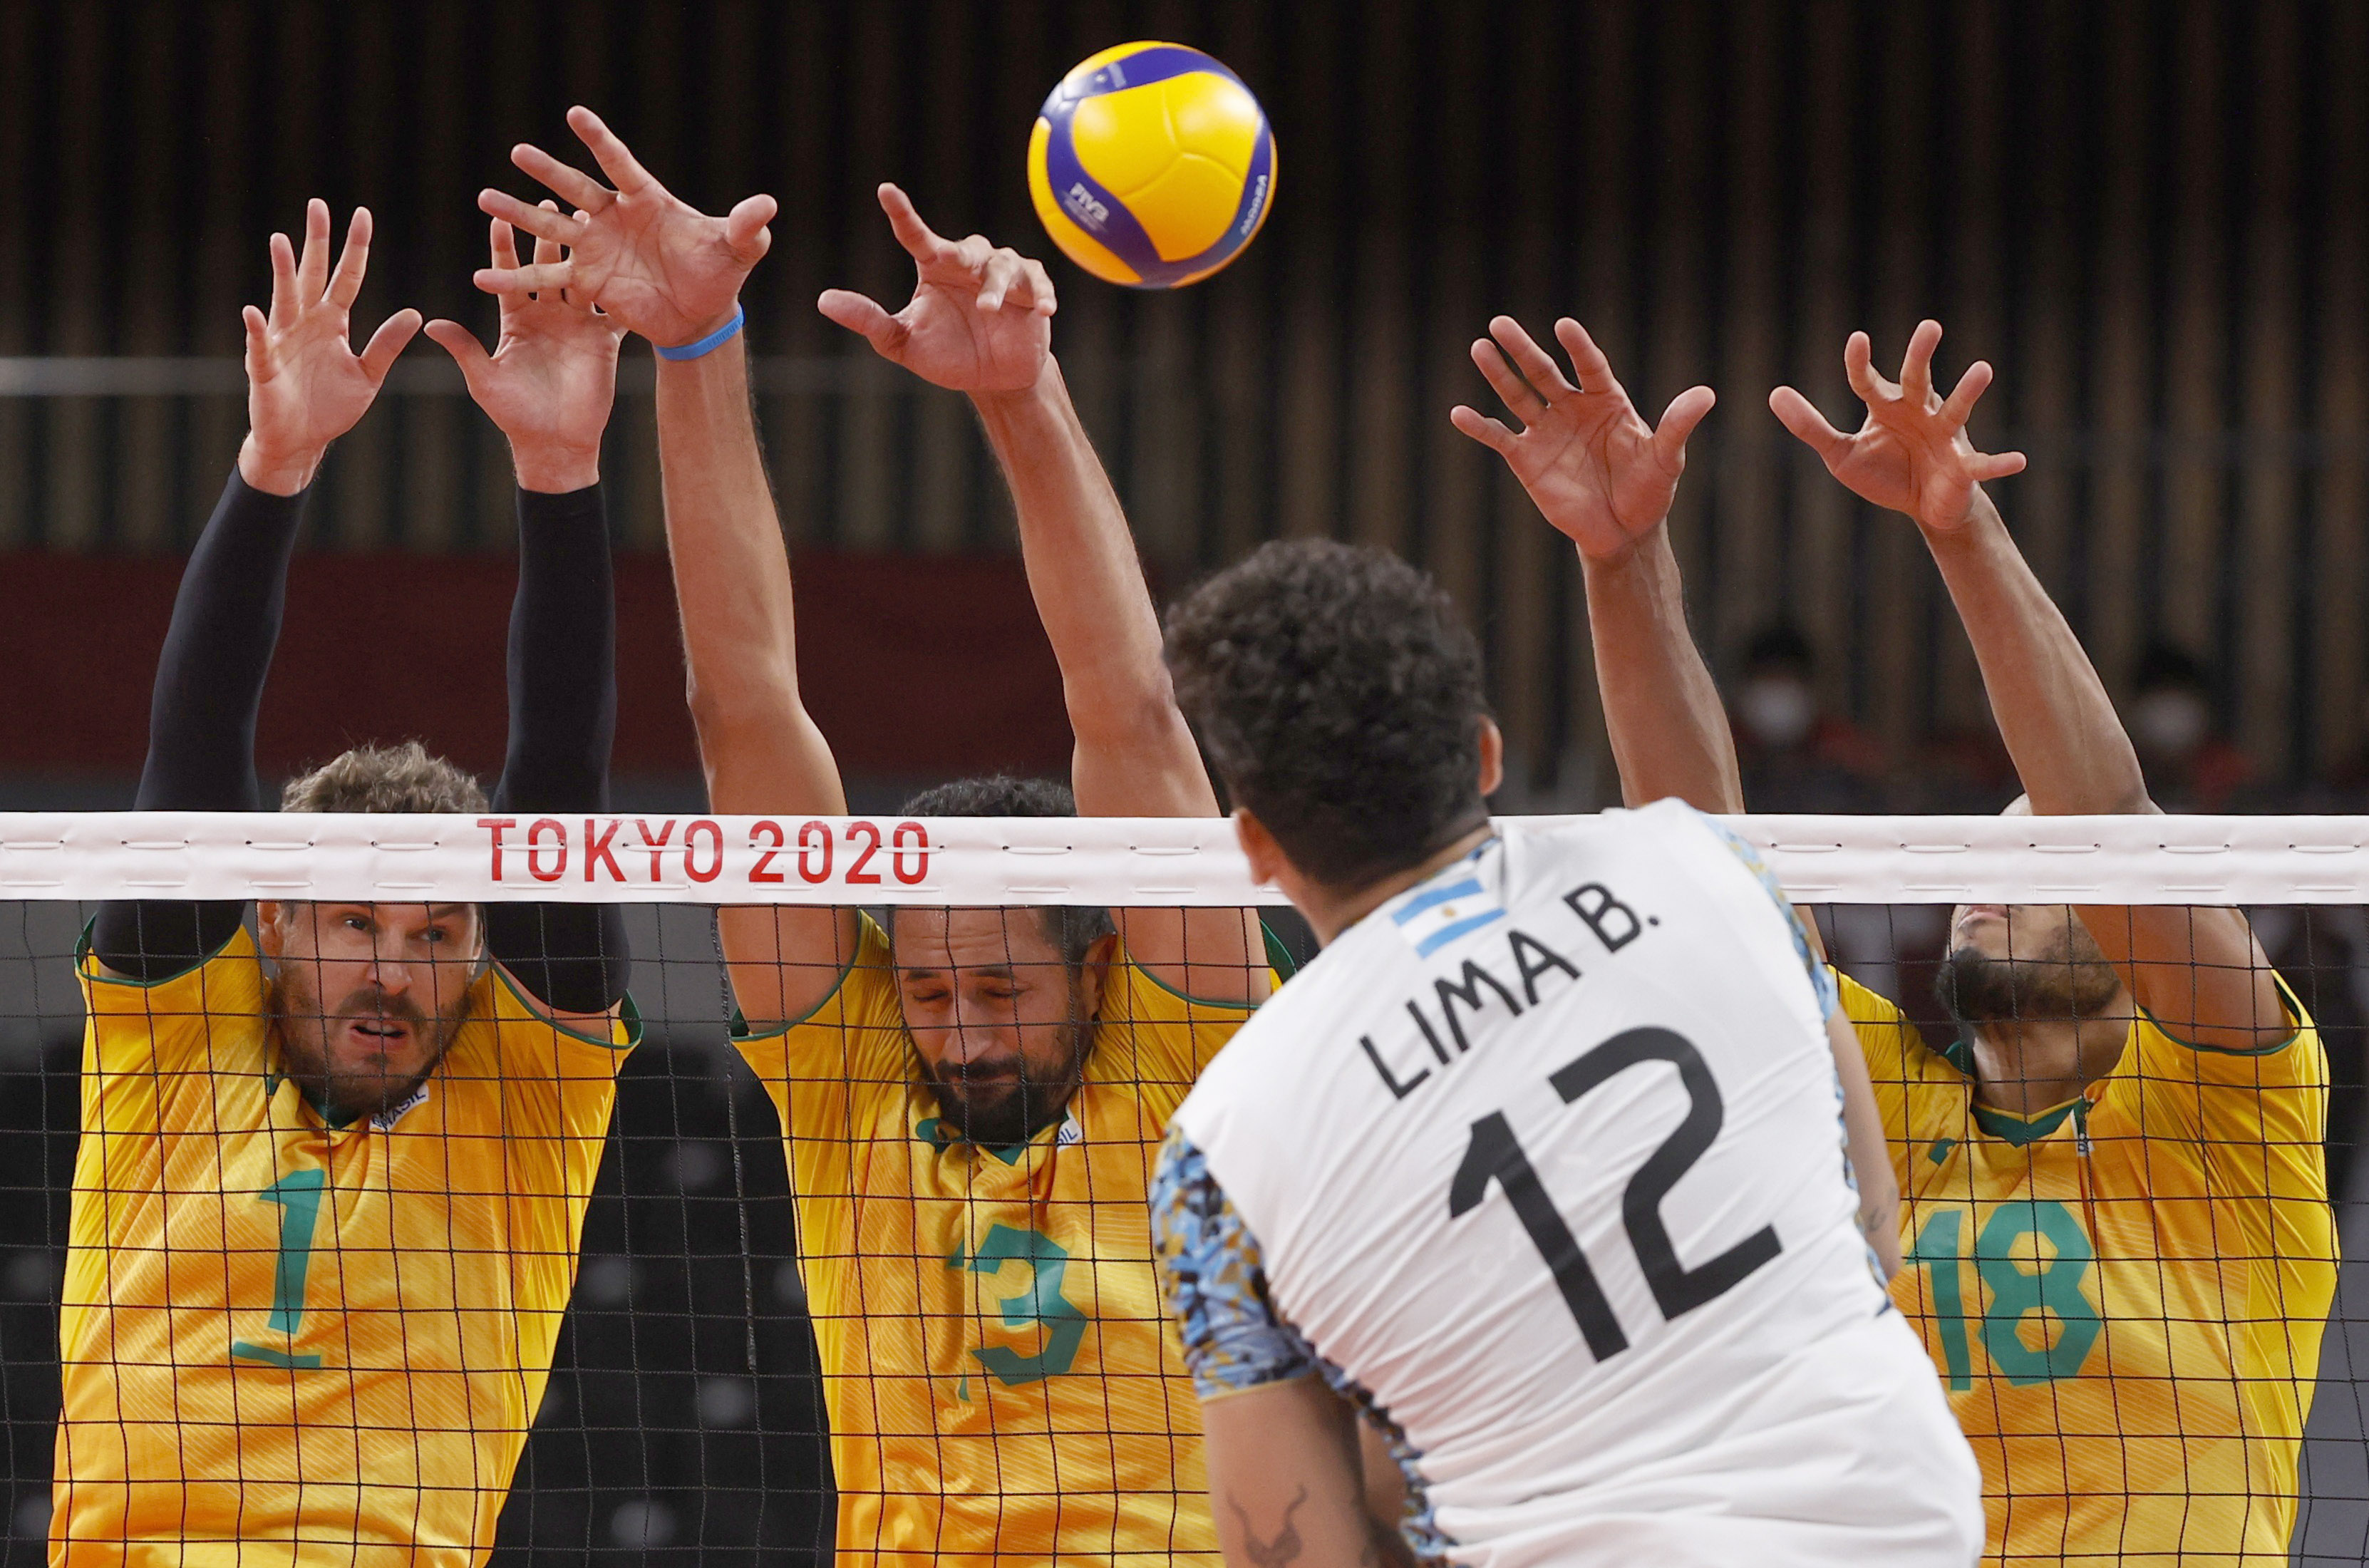 Bruno Lima breaks Brazil's blockade in the decisive duel that allowed Argentina to celebrate a bronze medal in Tokyo.  Photo: Reuters/Valentin Ogirenko